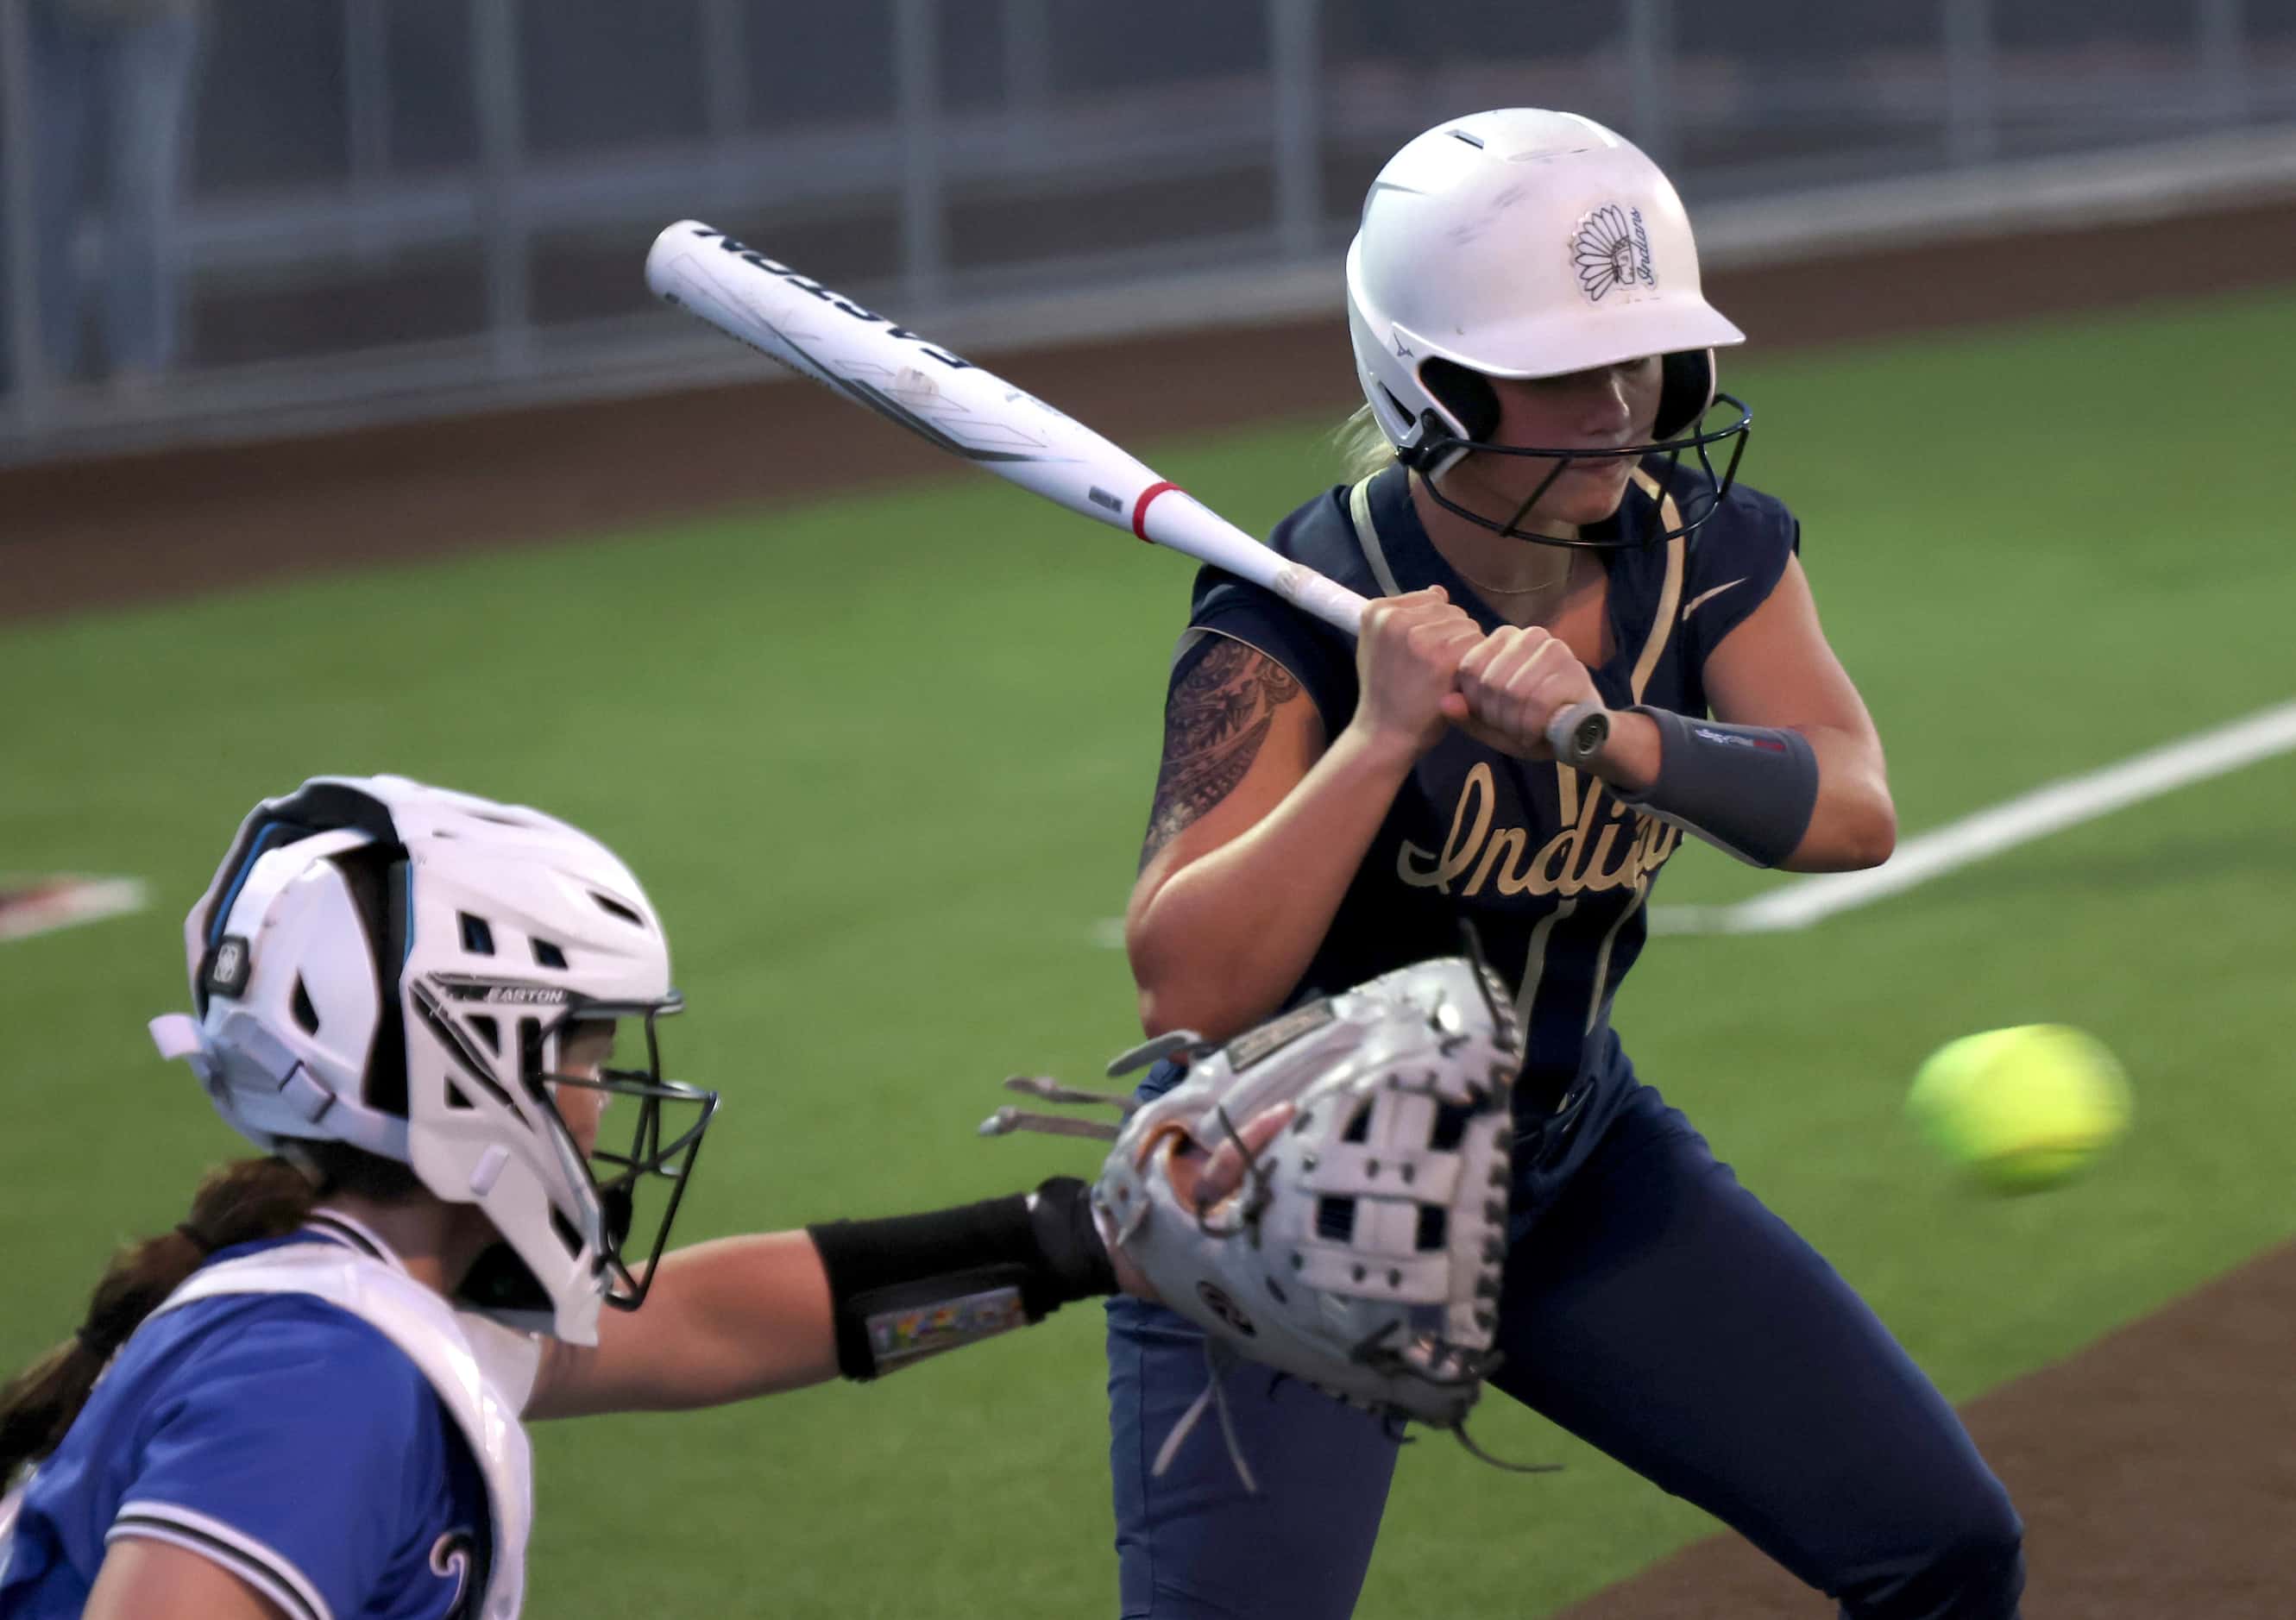 Keller's Mackenna Jackson (8) holds up on a pitch outside of the strike zone while batting...